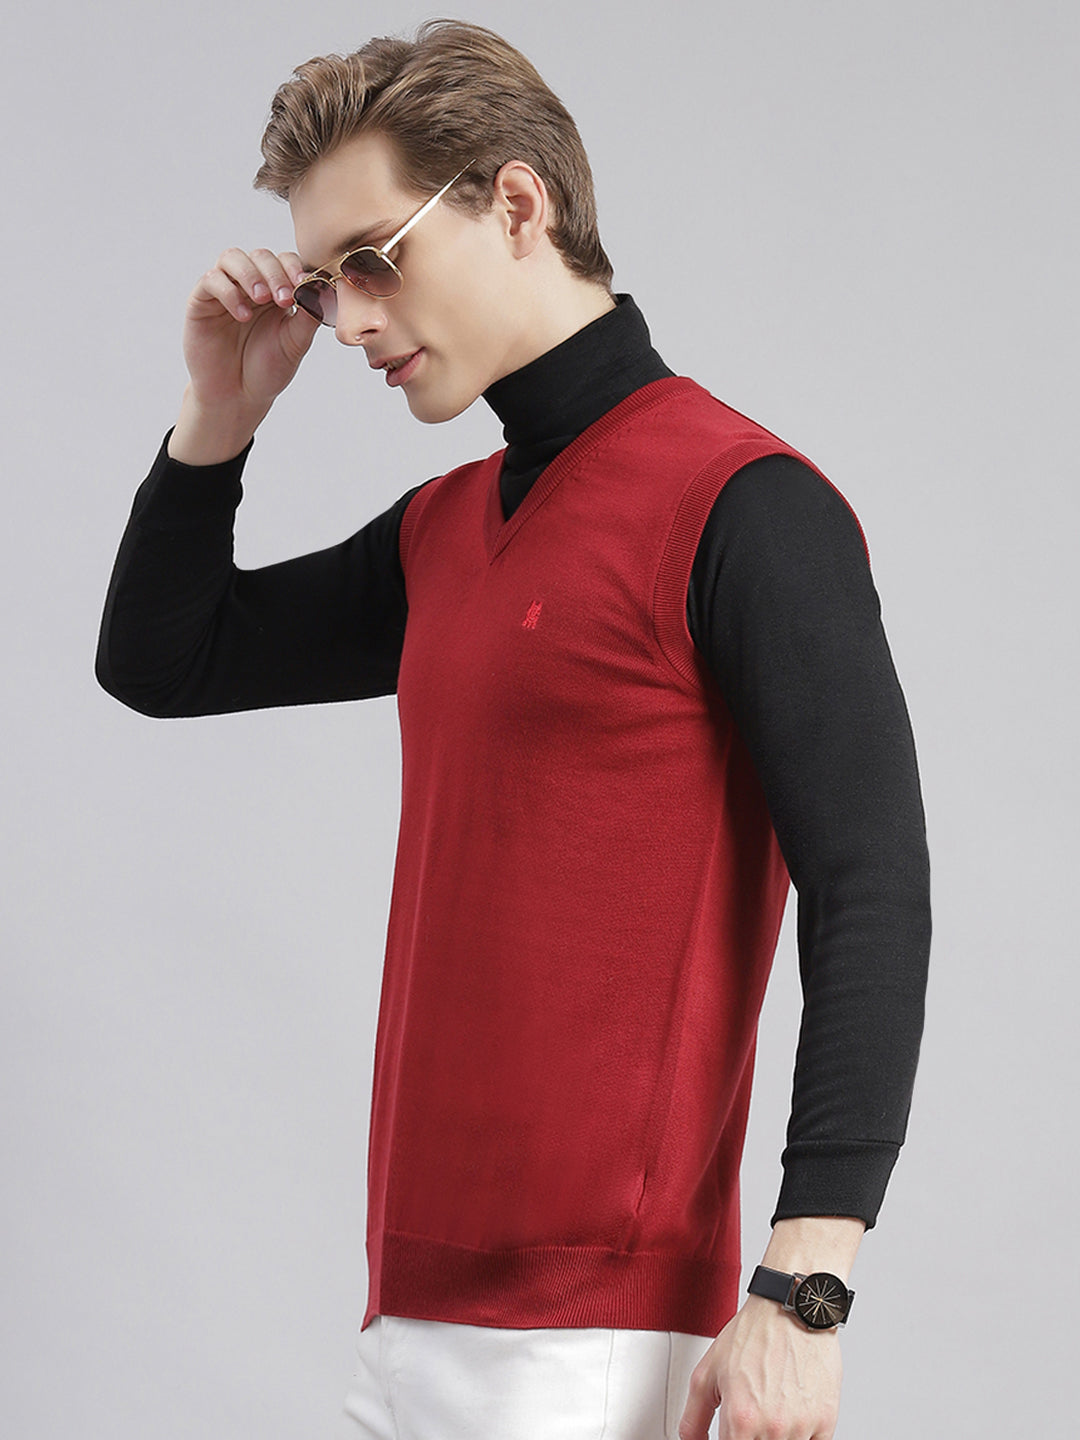 Men Maroon Solid V Neck Sleeveless Sweaters/Pullovers